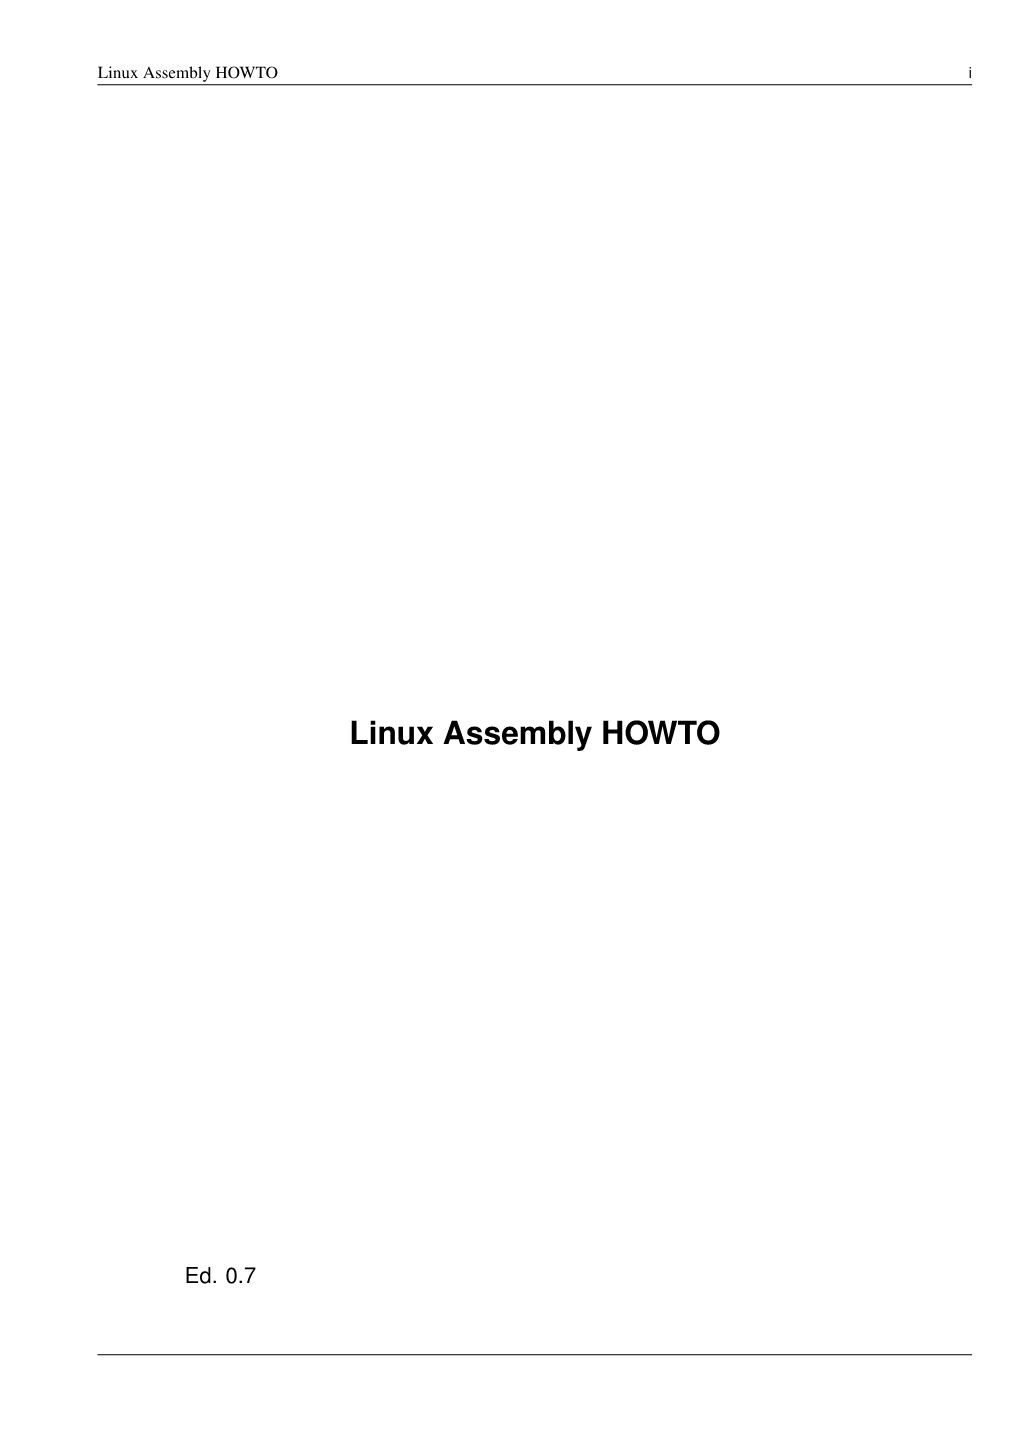 Linux Assembly HOWTO I